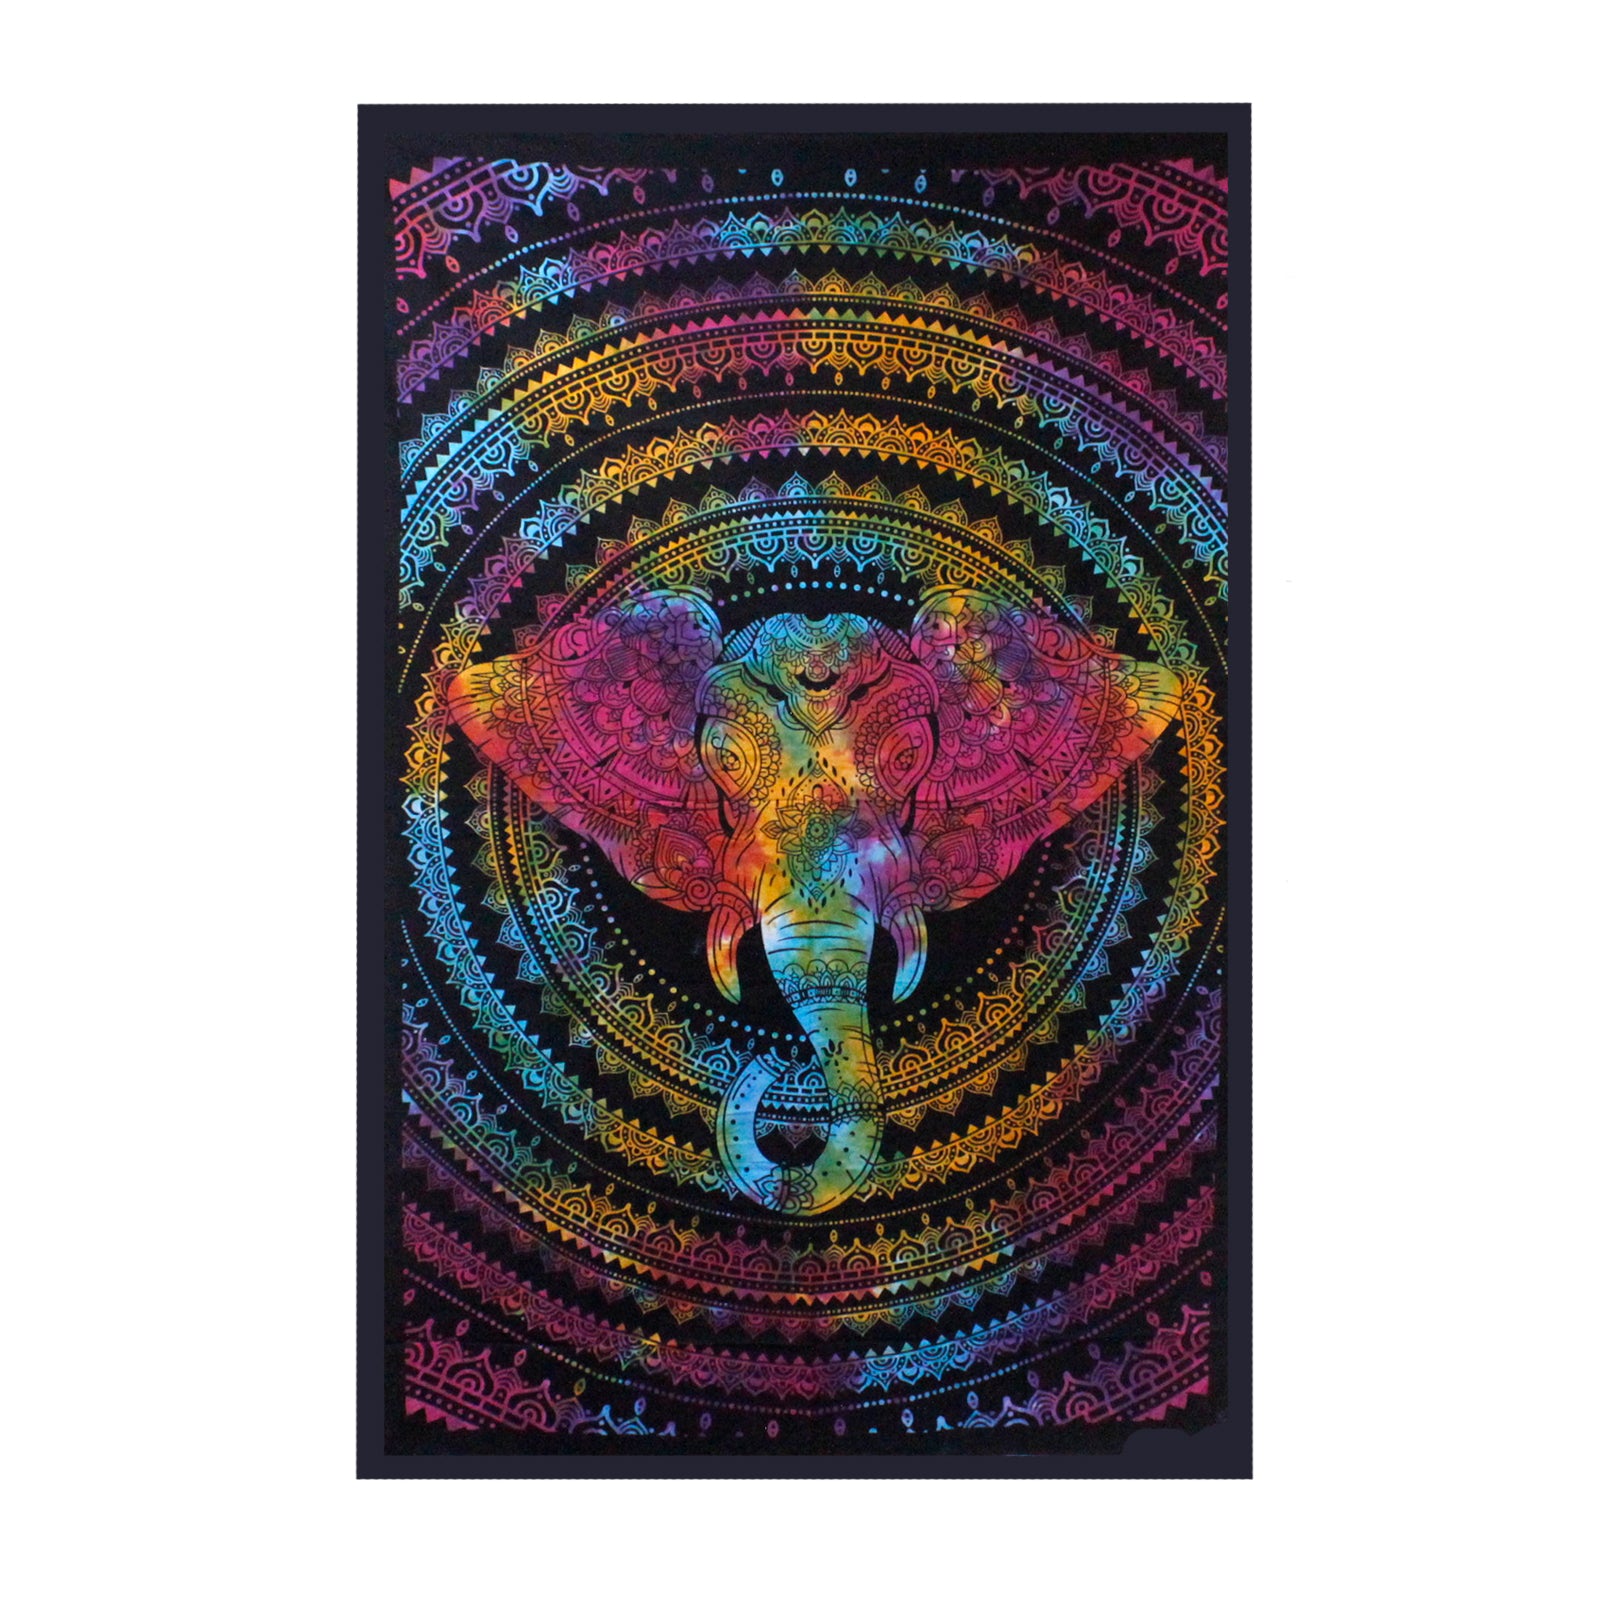 View Single Cotton Bedspread Wall Hanging Elephant Head information